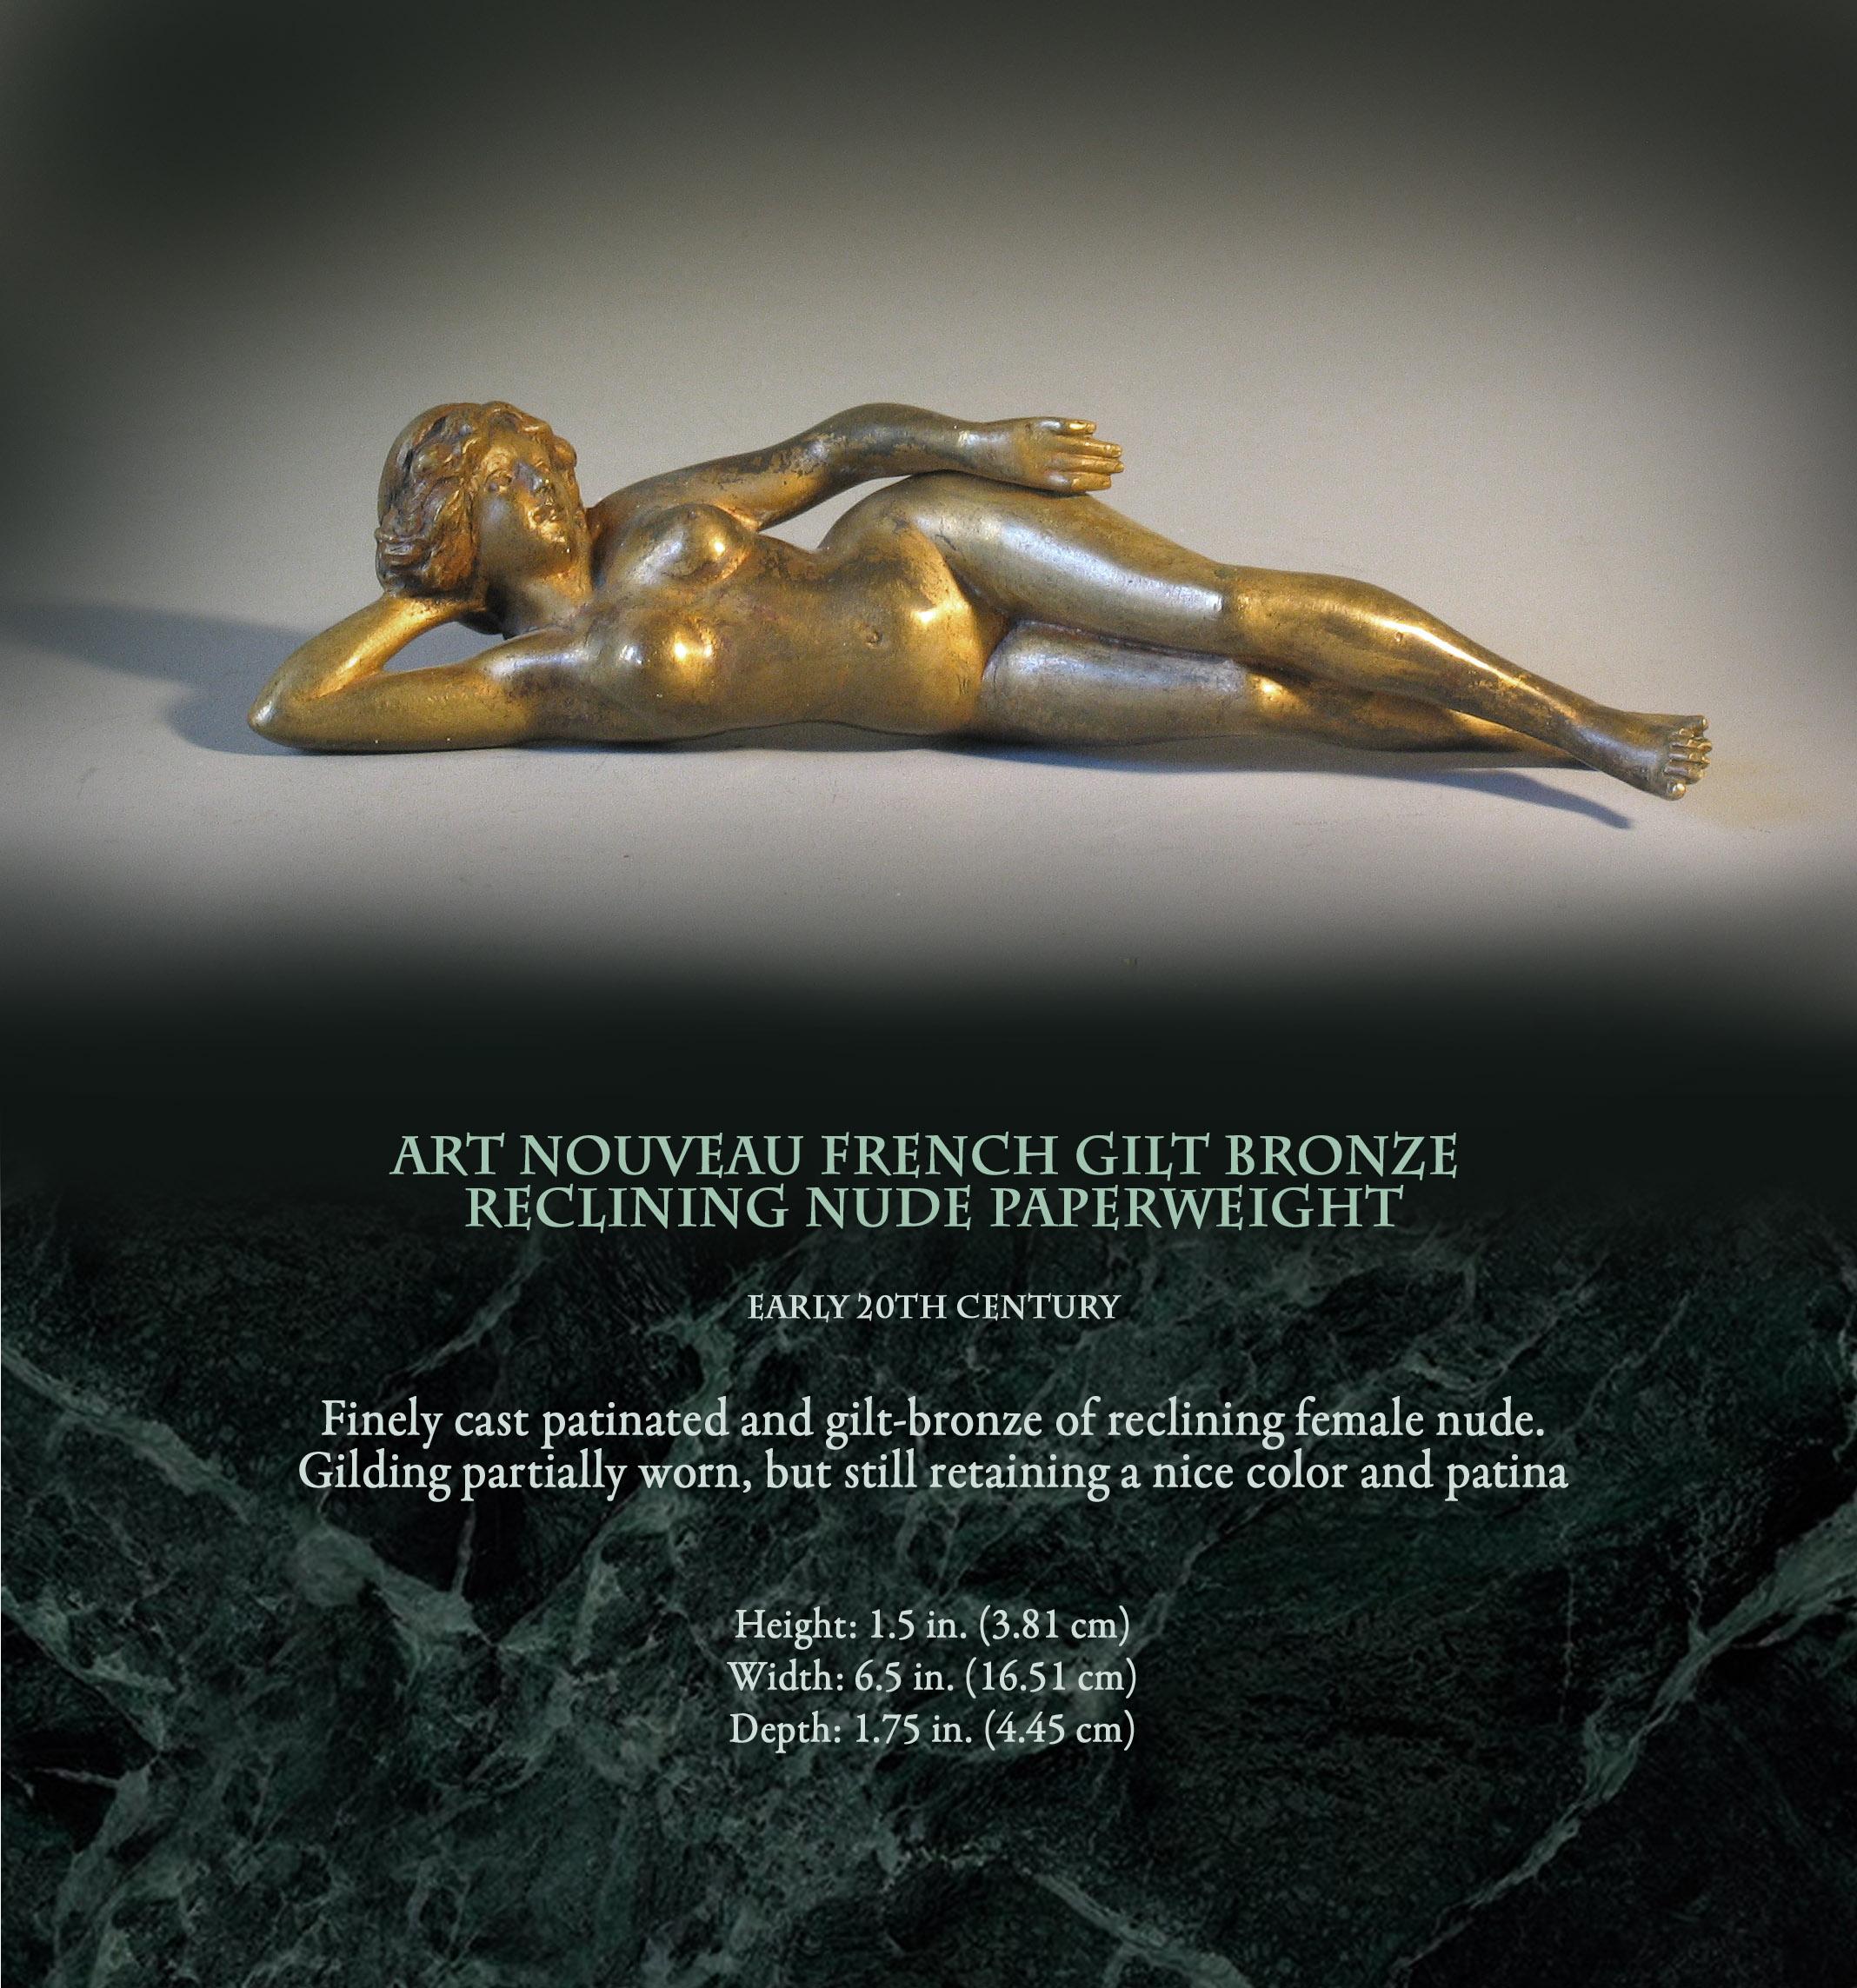 Art Nouveau French gilt bronze
Reclining nude paperweight,

Early 20th century.

Finely cast patinated and gilt-bronze of reclining female nude.
Gilding partially worn, but still retaining a nice color and patina.


Measures: Height 1.5